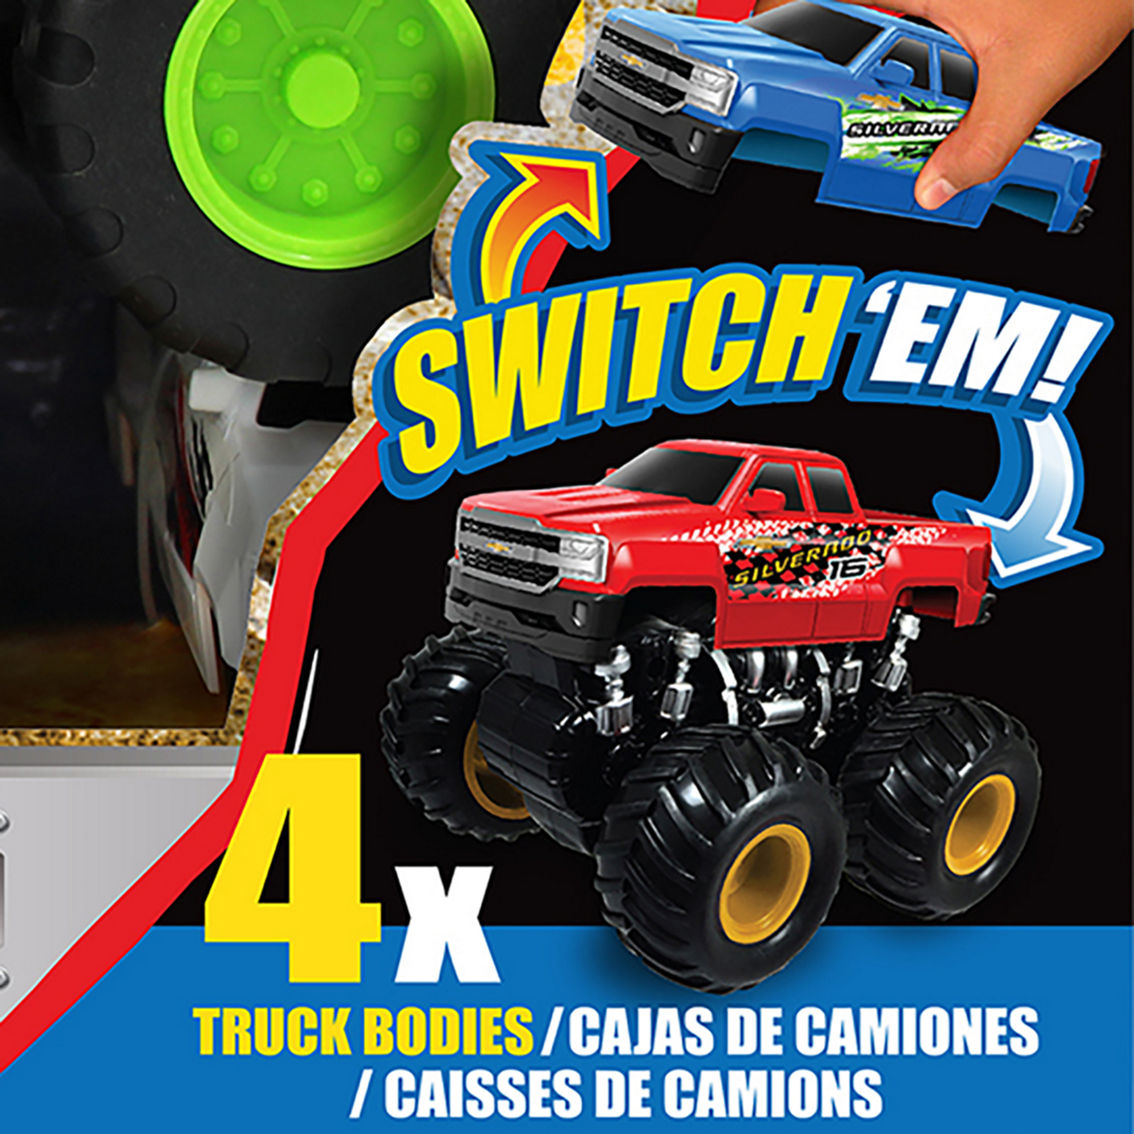 Chevy Silverado Friction Switch'Em Power Gift Set - Image 3 of 3